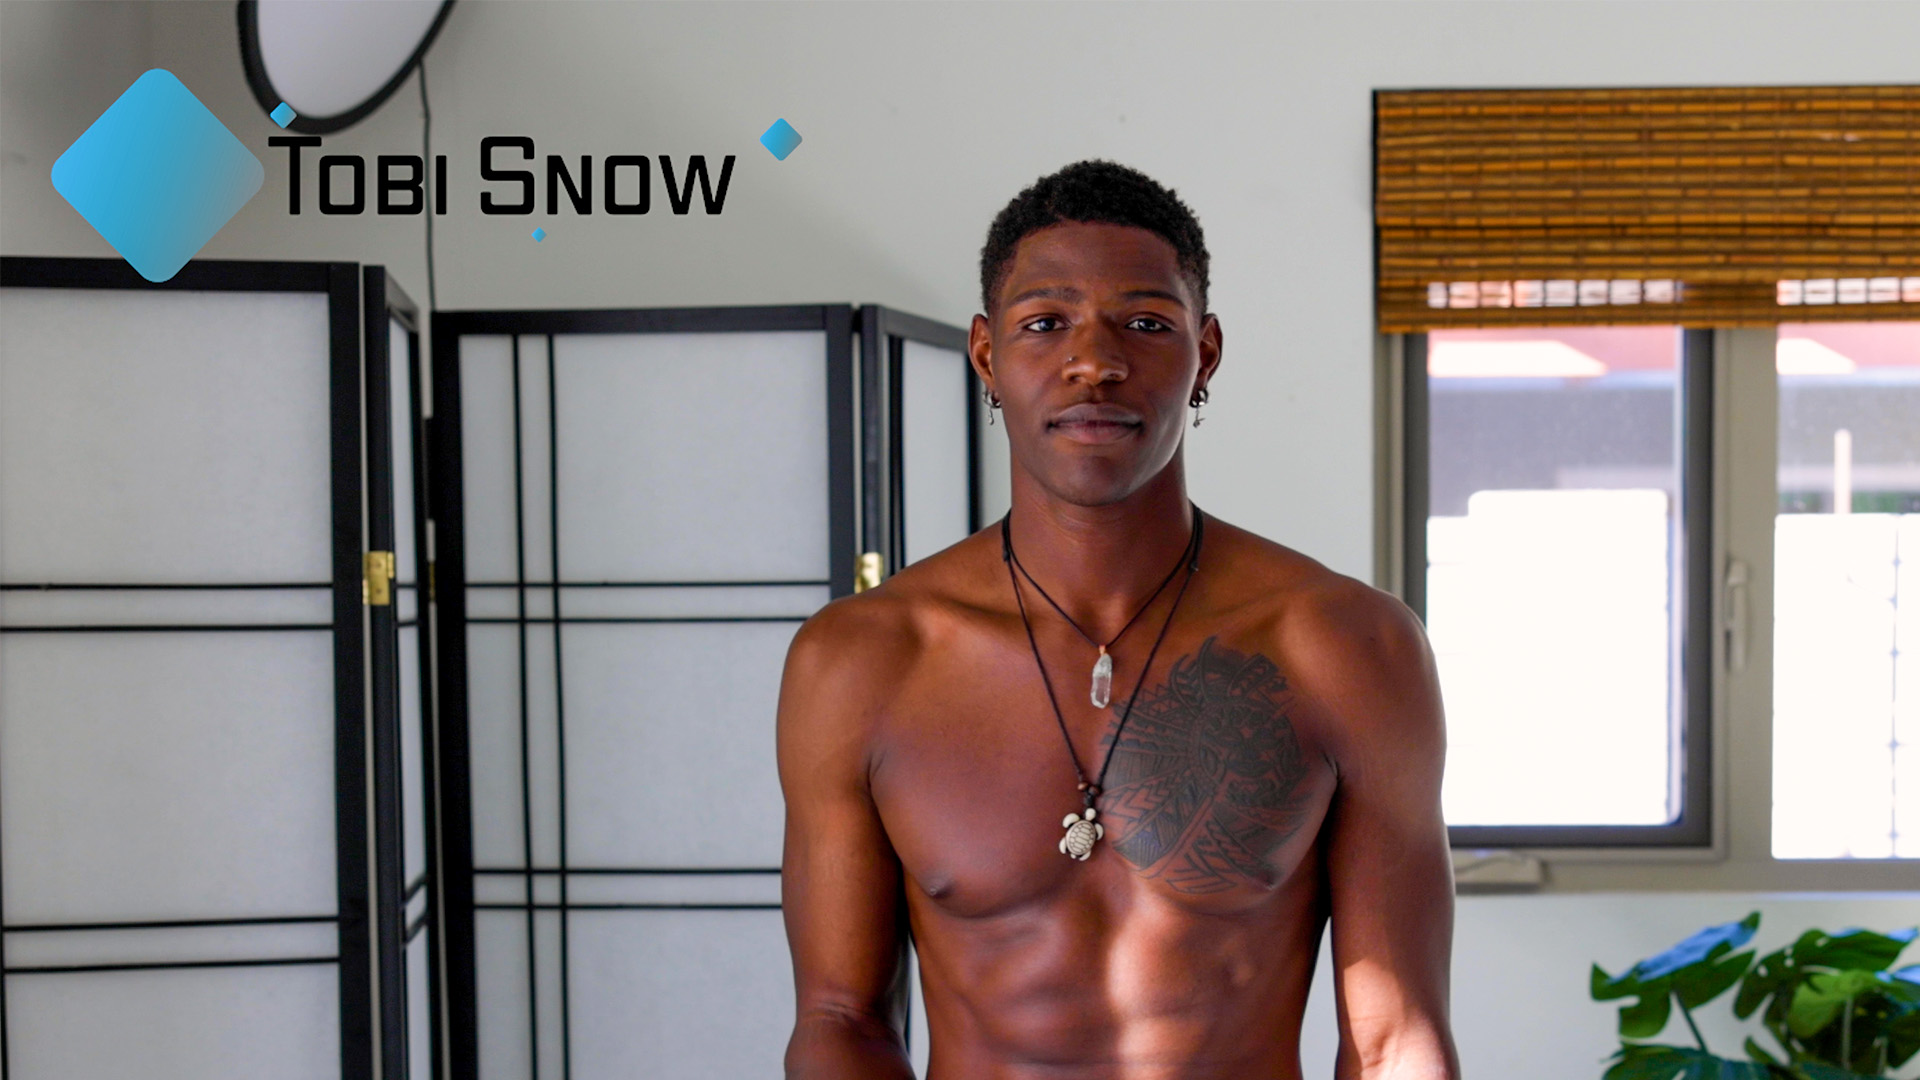 Tobi Snow Kows He's Hot Enough To Be Here!